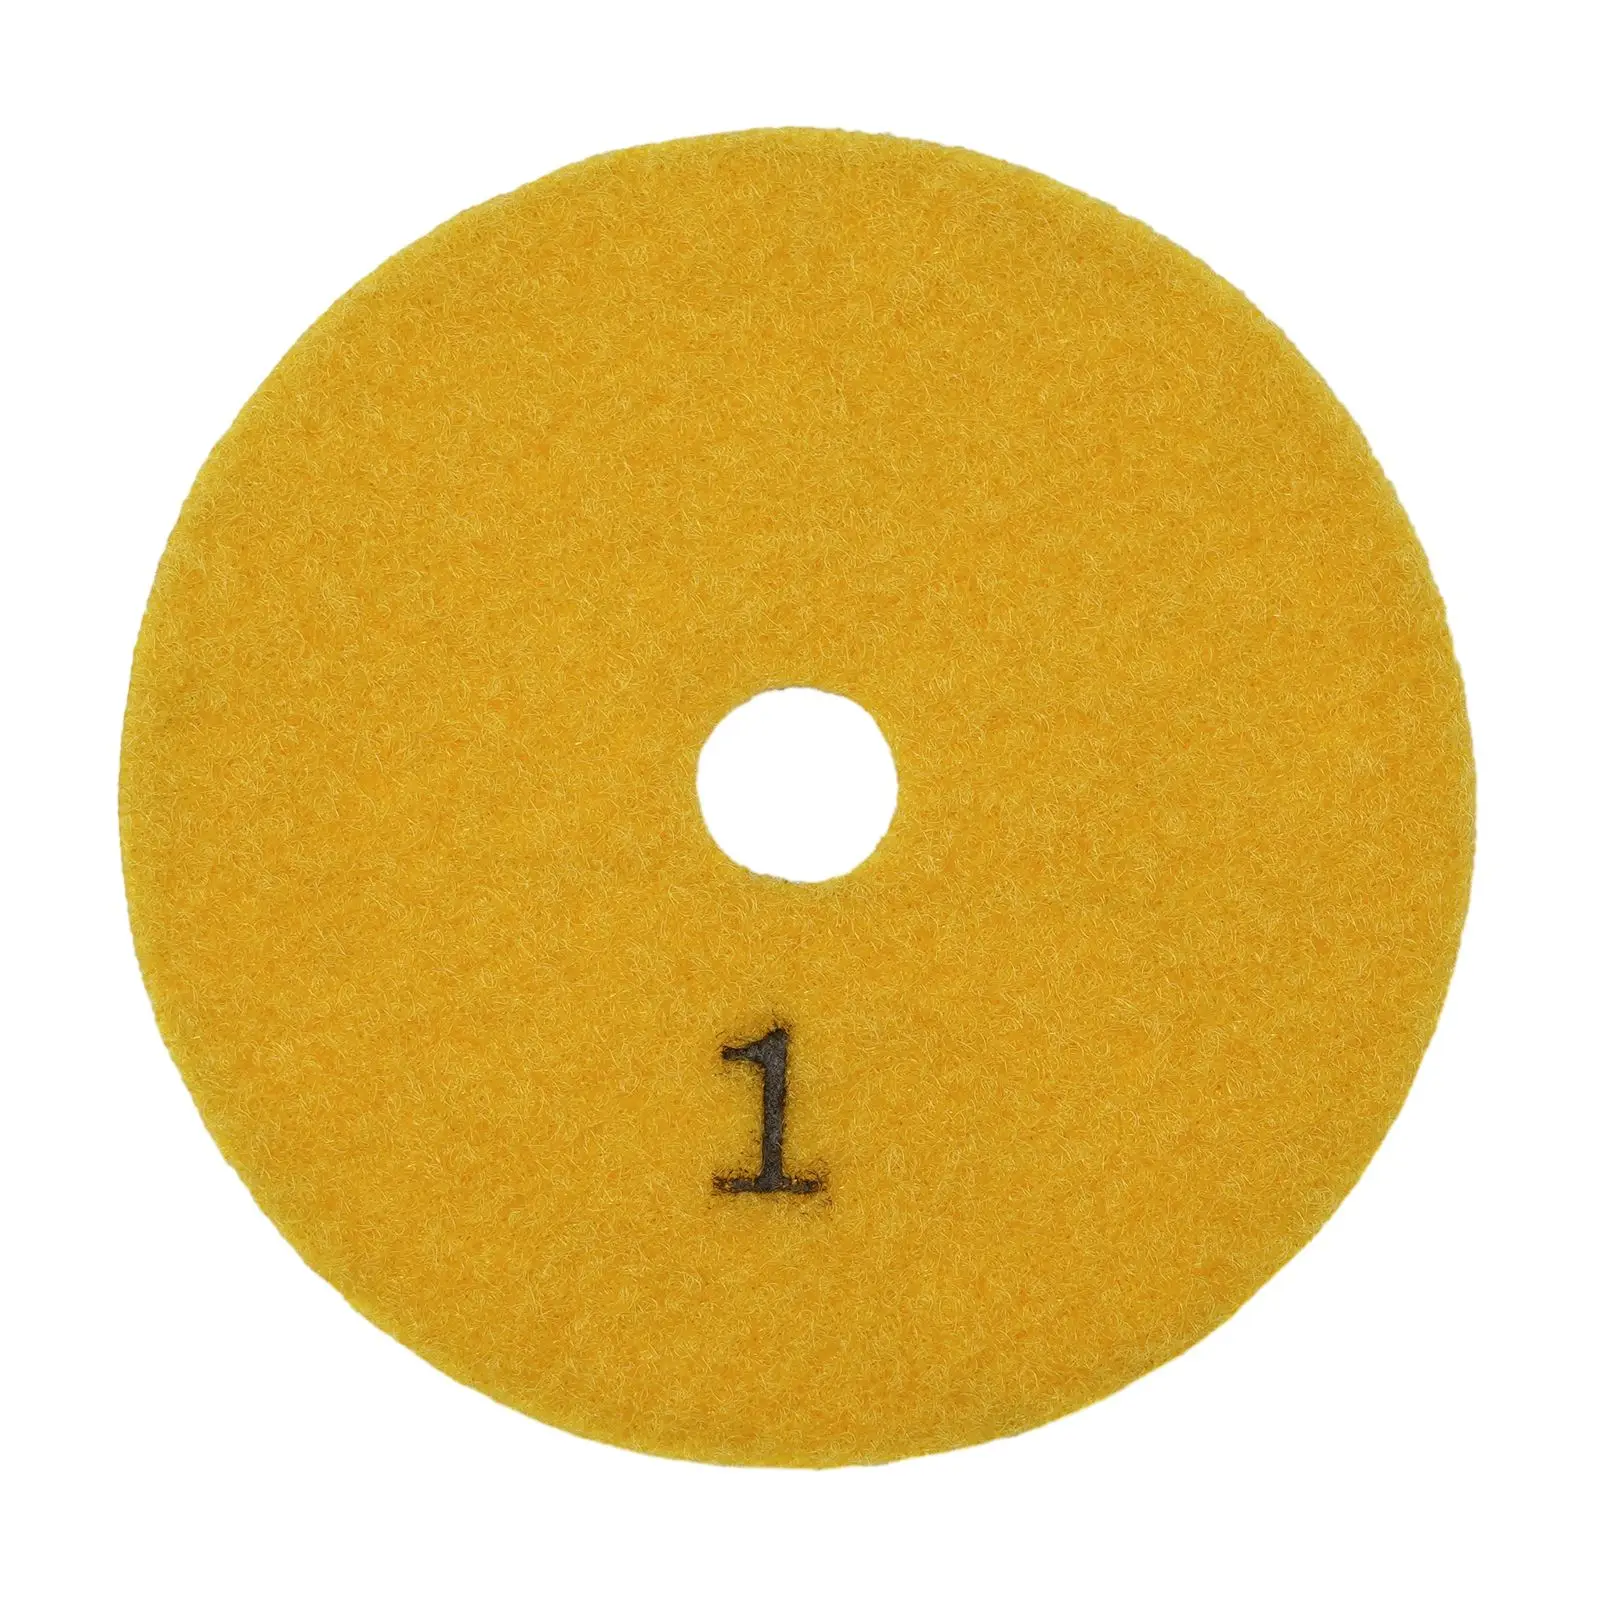 4inch Diamond Polishing Pads for Granite  Marble  Concrete Wet or Dry Use High Diamond Count  Flawless Shine in 3 Steps